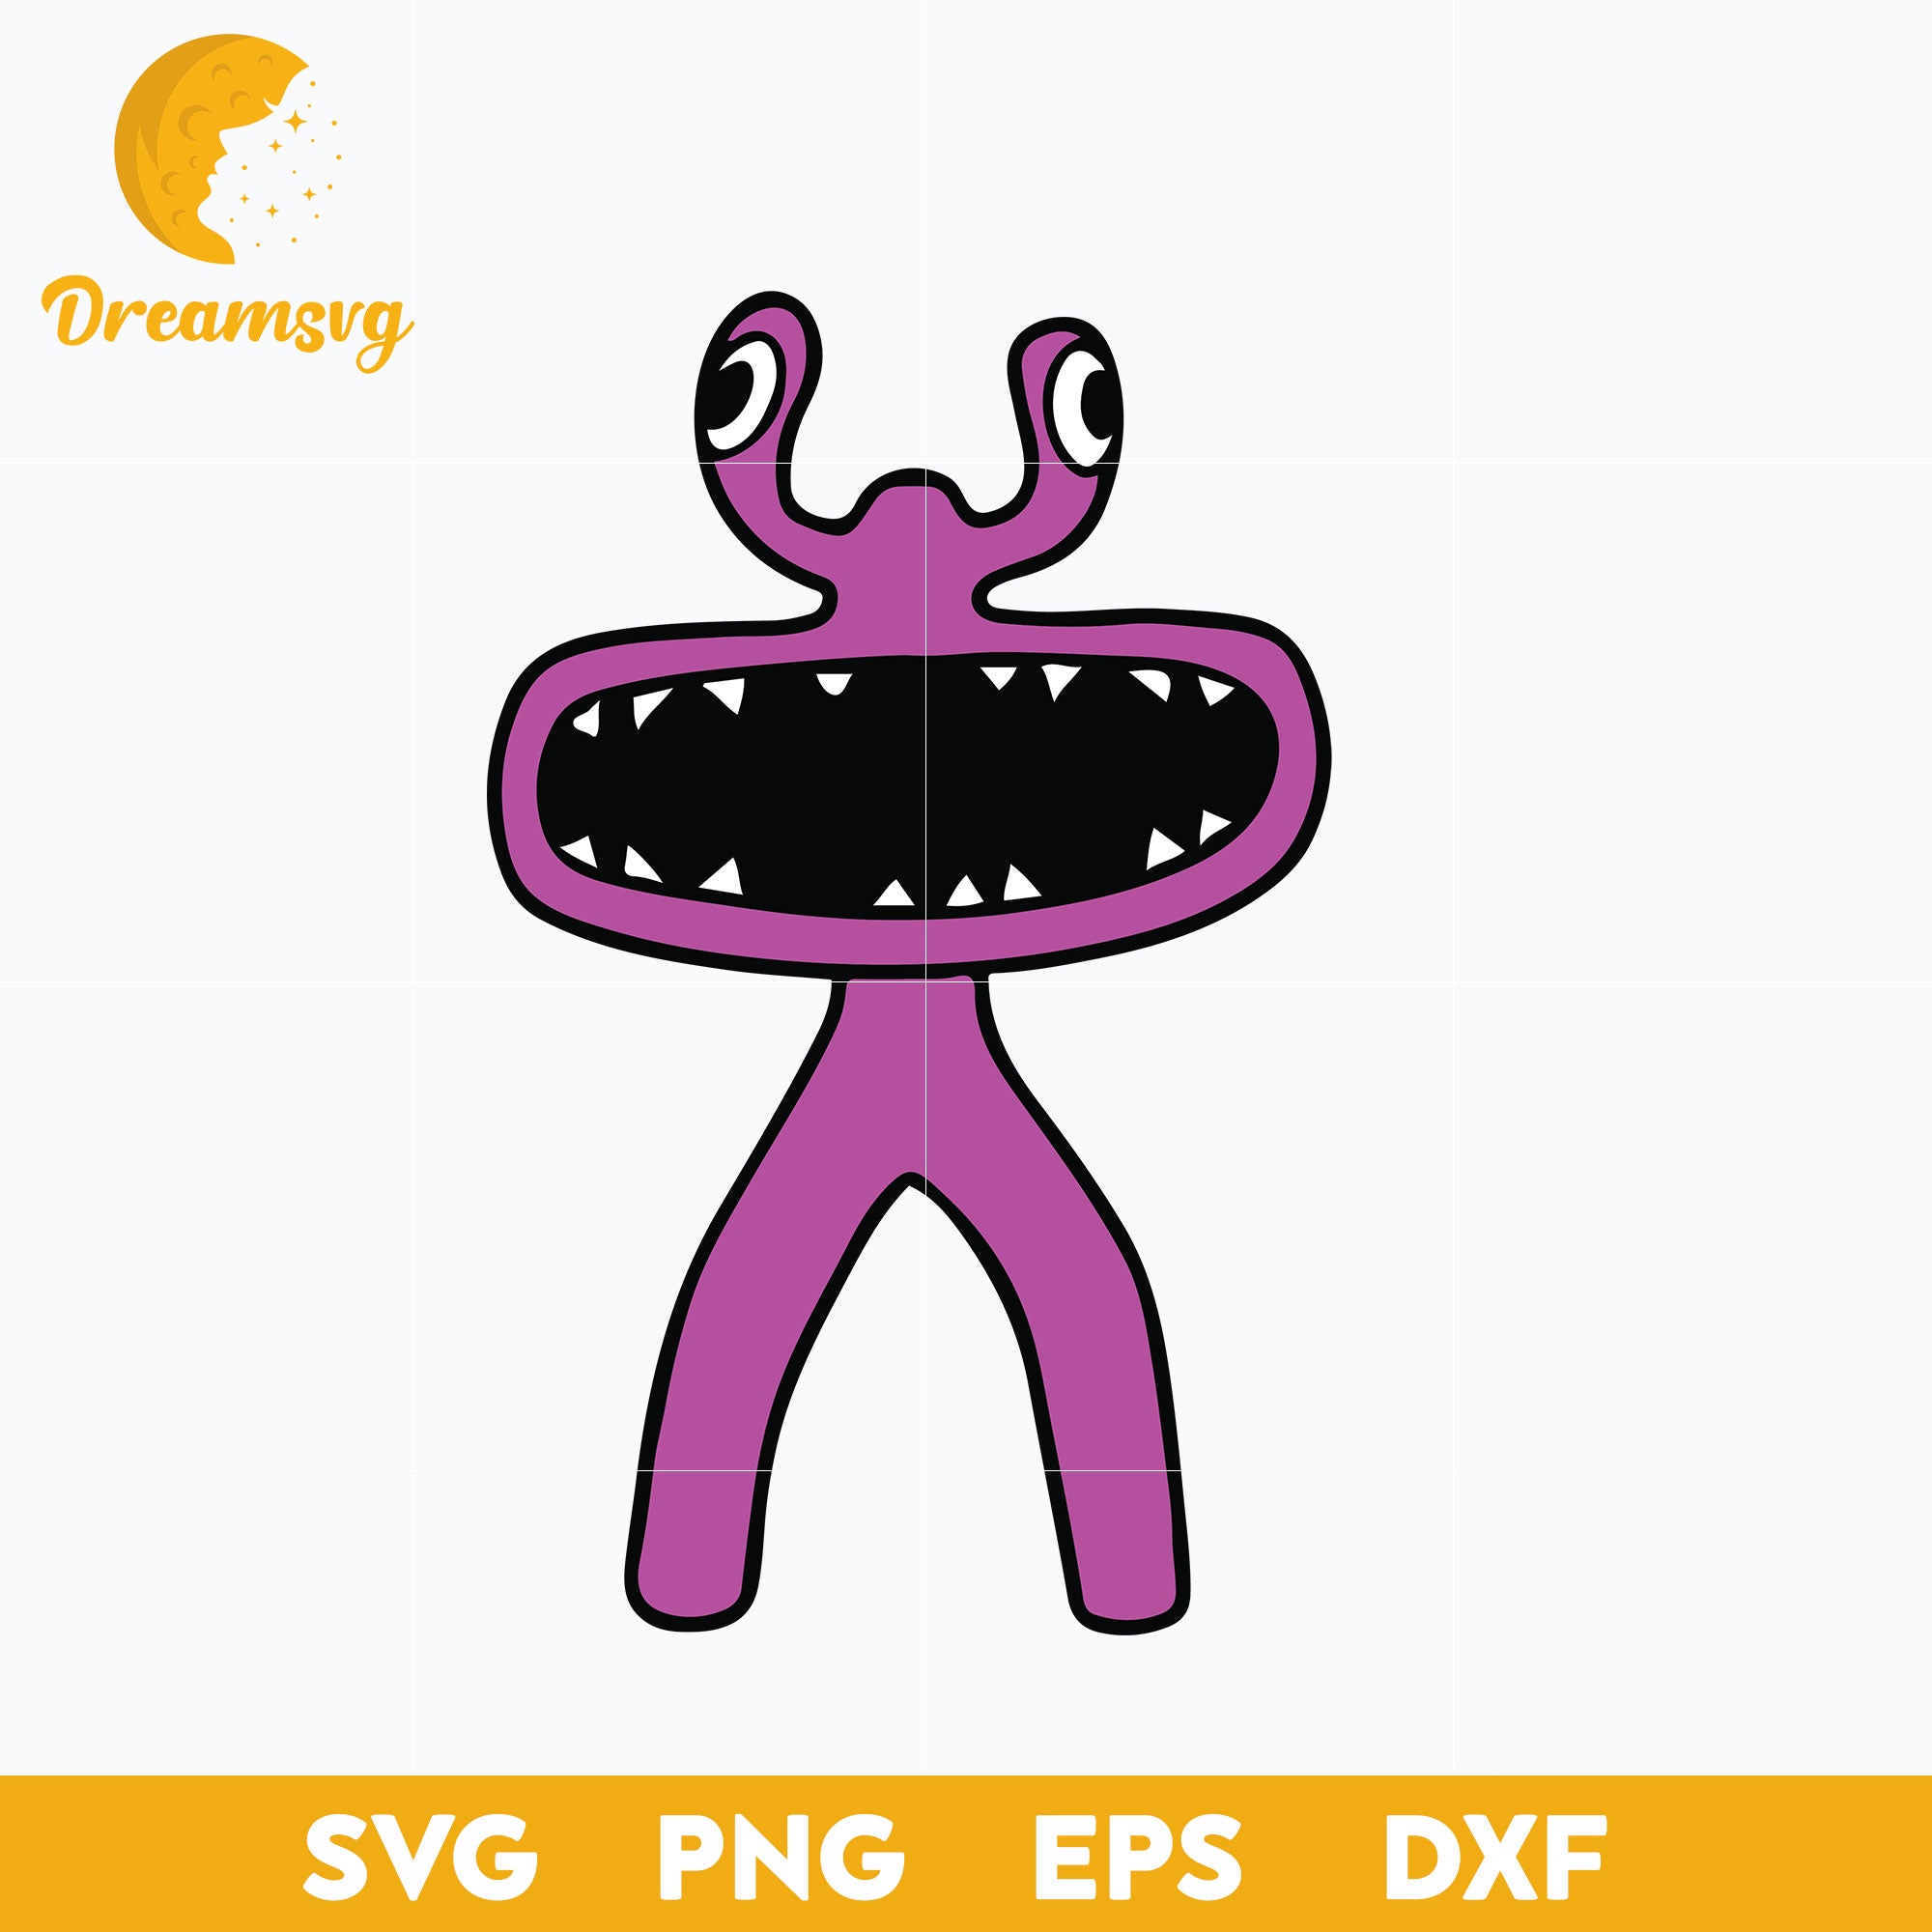 Green from Rainbow Friends SVG, Funny SVG, PNG DXF EPS Digital File.